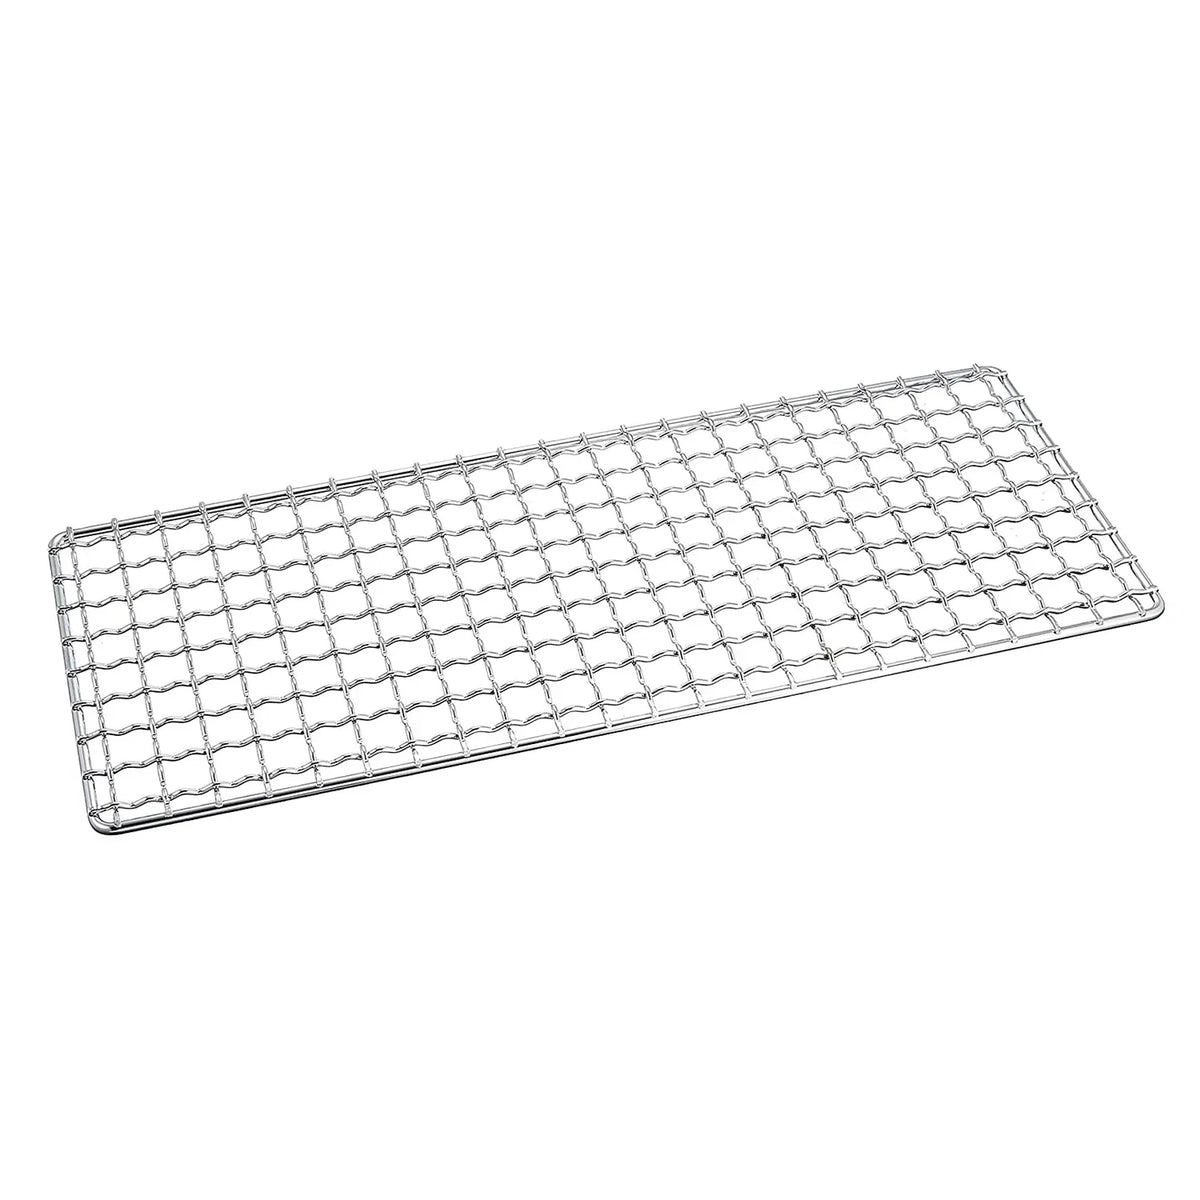 EBM Stainless Steel Barbecue Grill Mesh